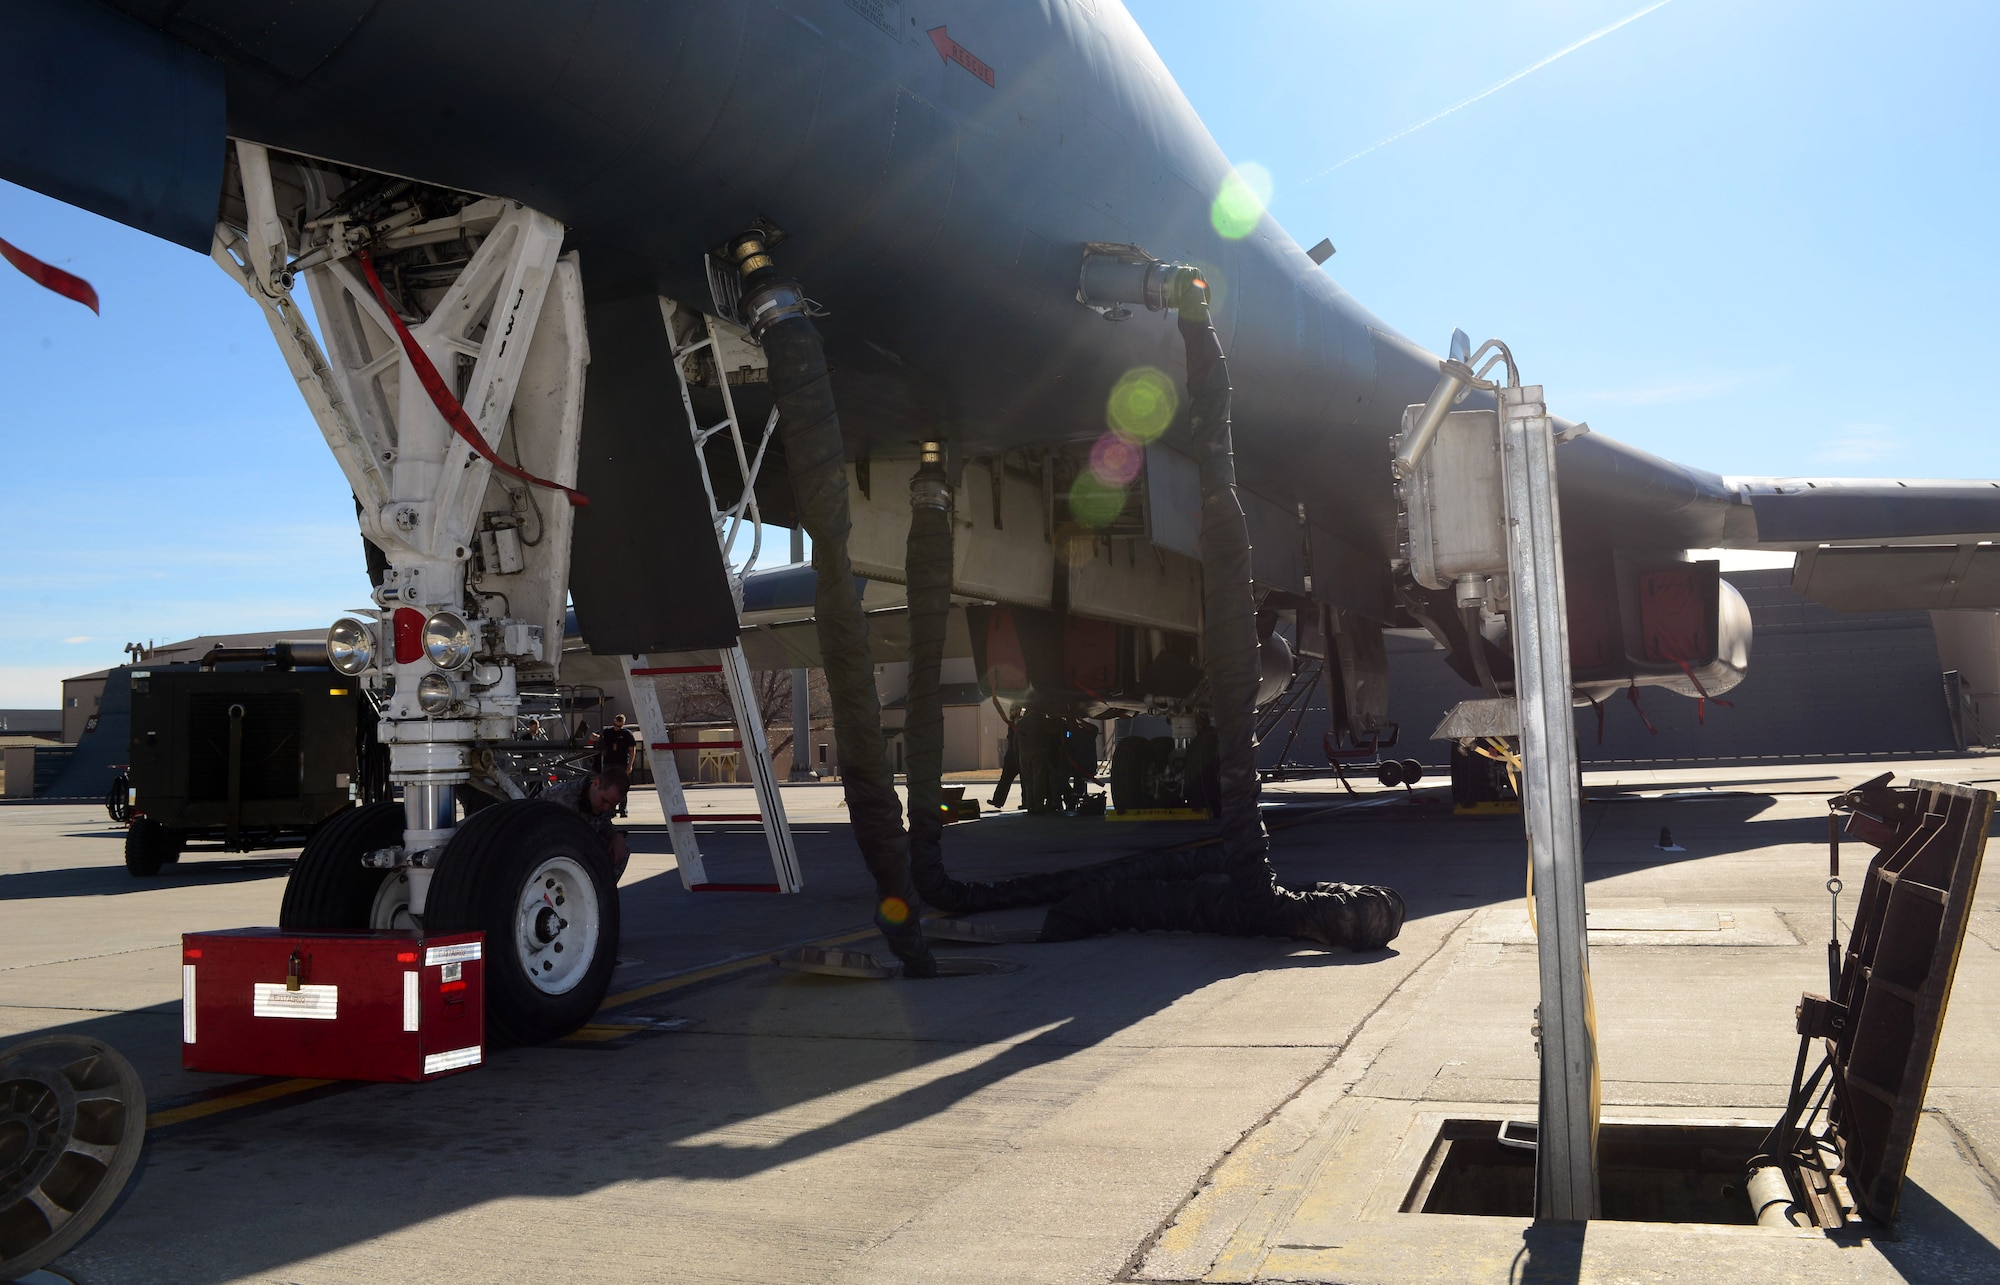 A B-1 bomber is hooked up to the Consolidated Aircraft Support System at Ellsworth Air Force Base, S.D., March 16, 2017. The CASS is made up of multiple structures and parts beneath the flight line used to provide both air and power to support the B-1 during pre-flight inspections. (U.S. Air Force photo by Airman 1st Class Donald C. Knechtel)